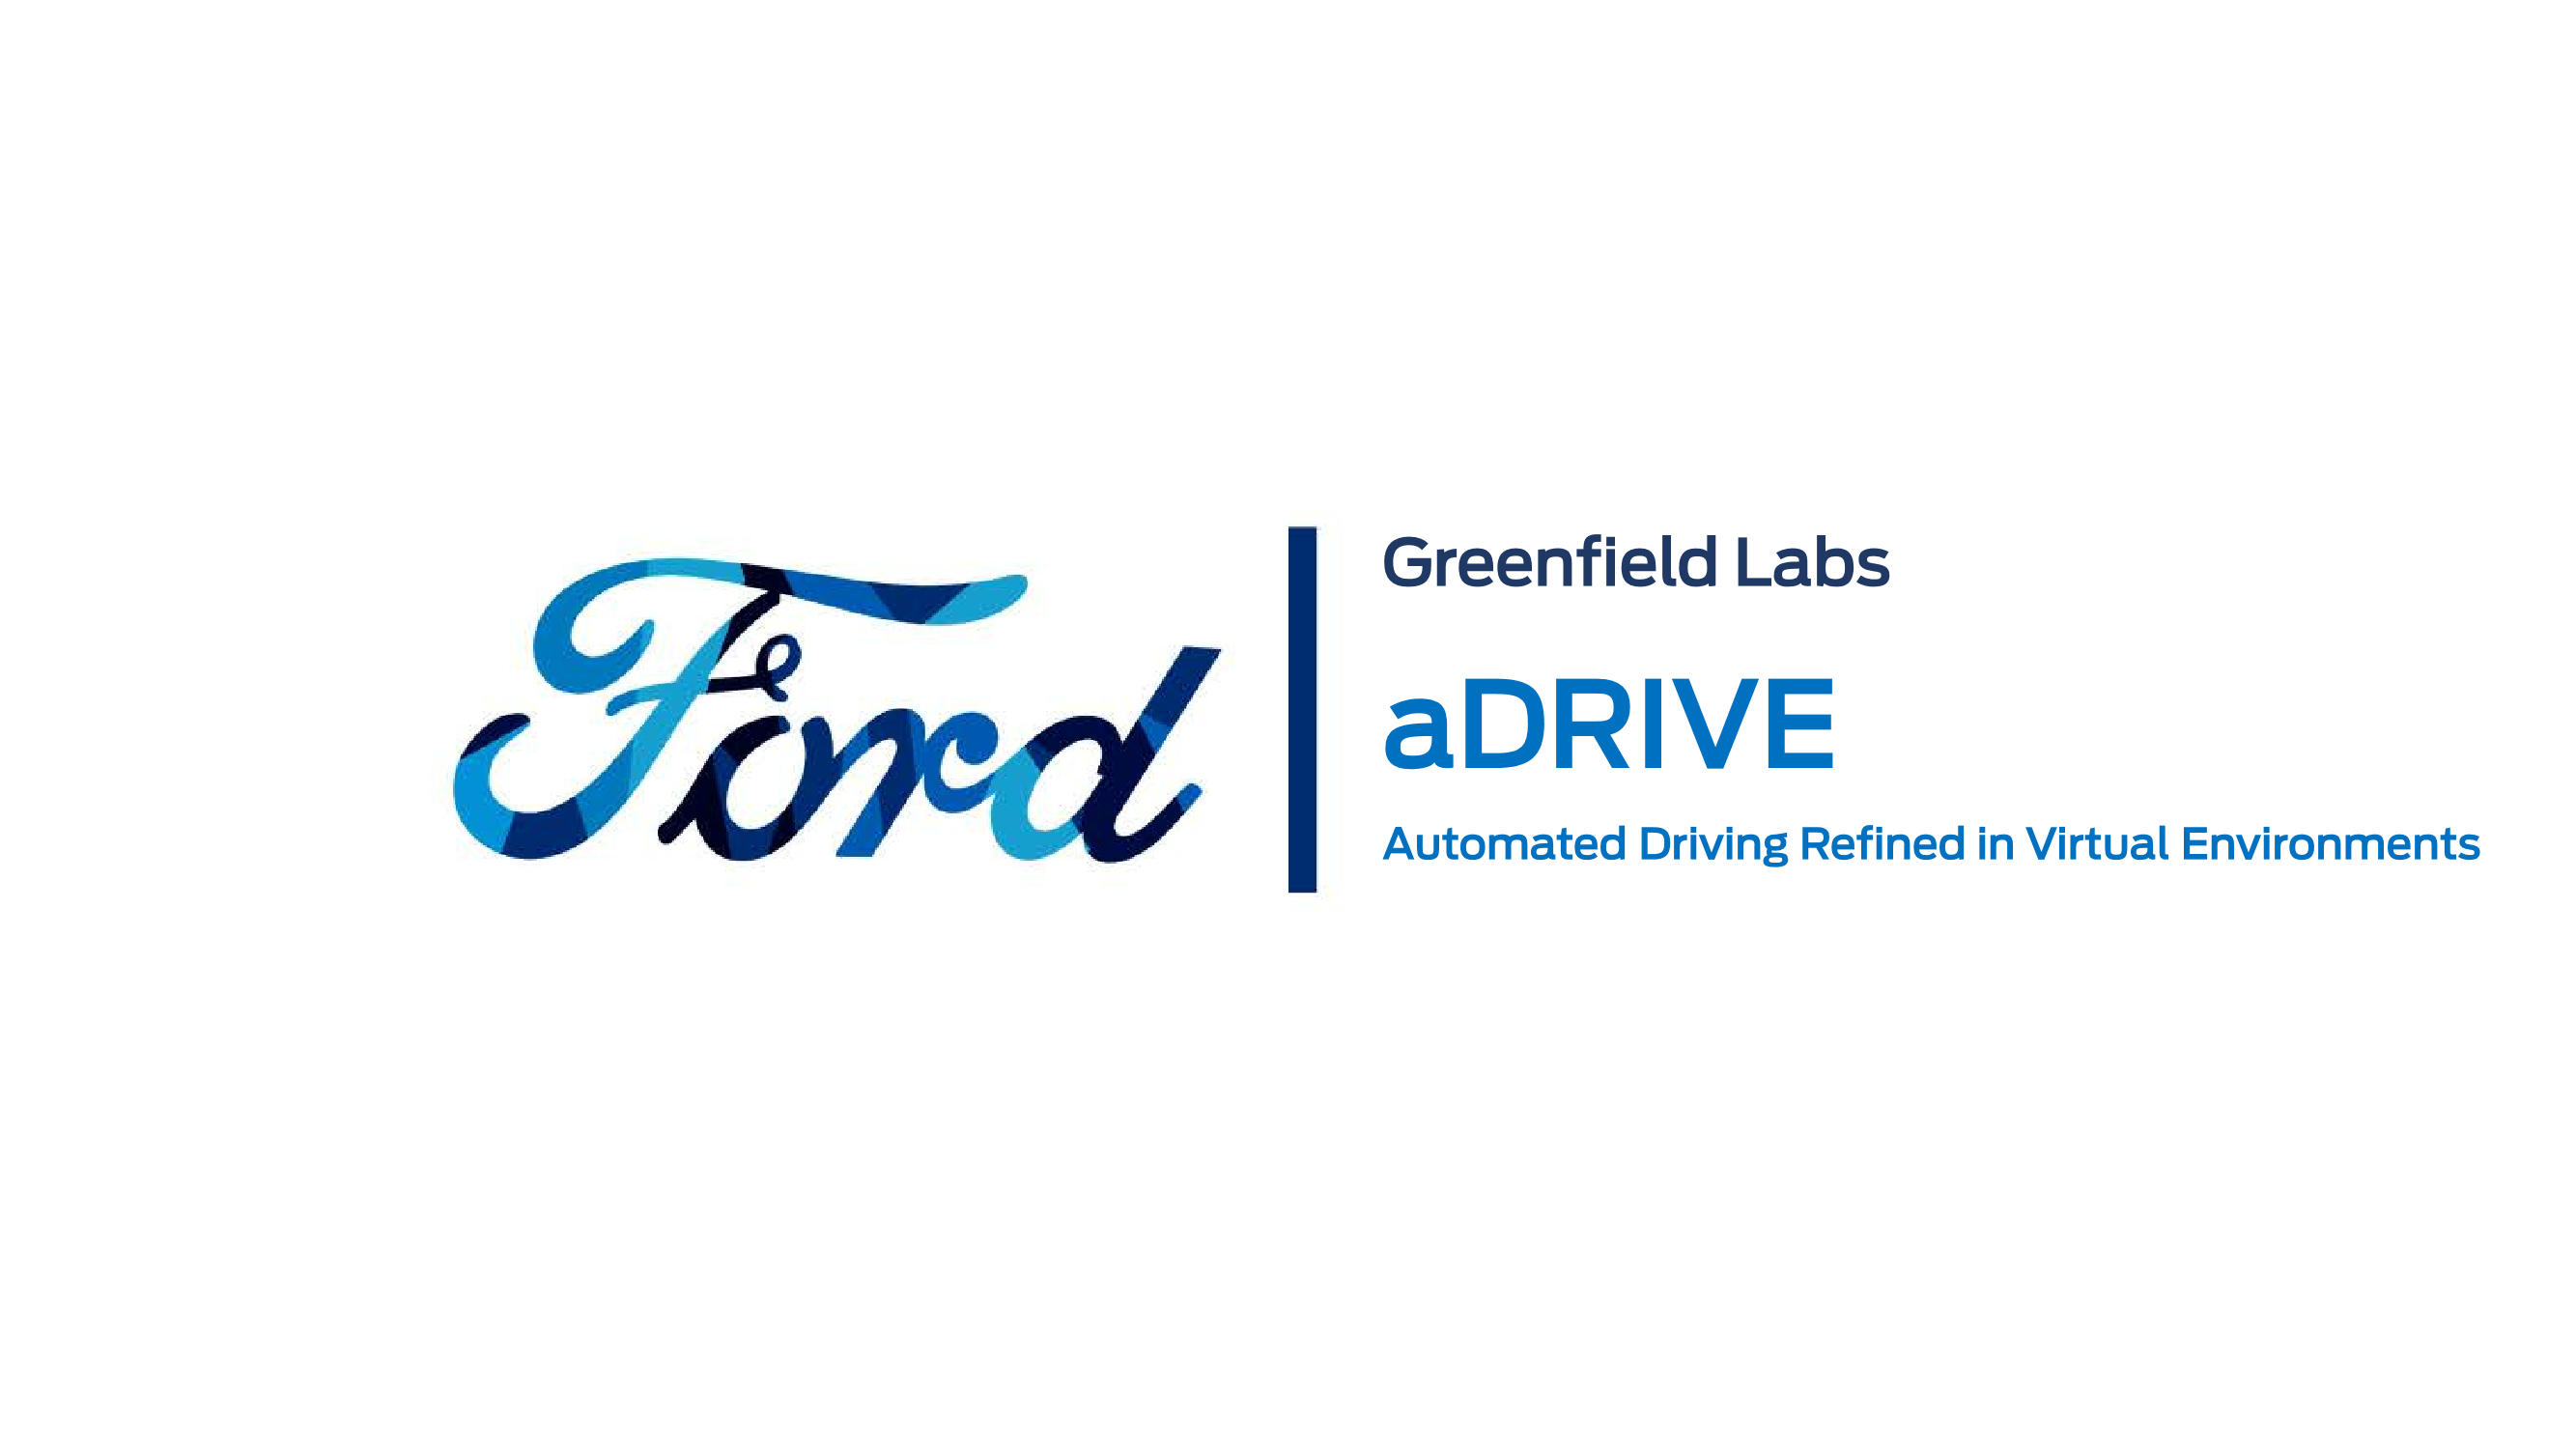 Automated Driving Refined in Virtual Environments